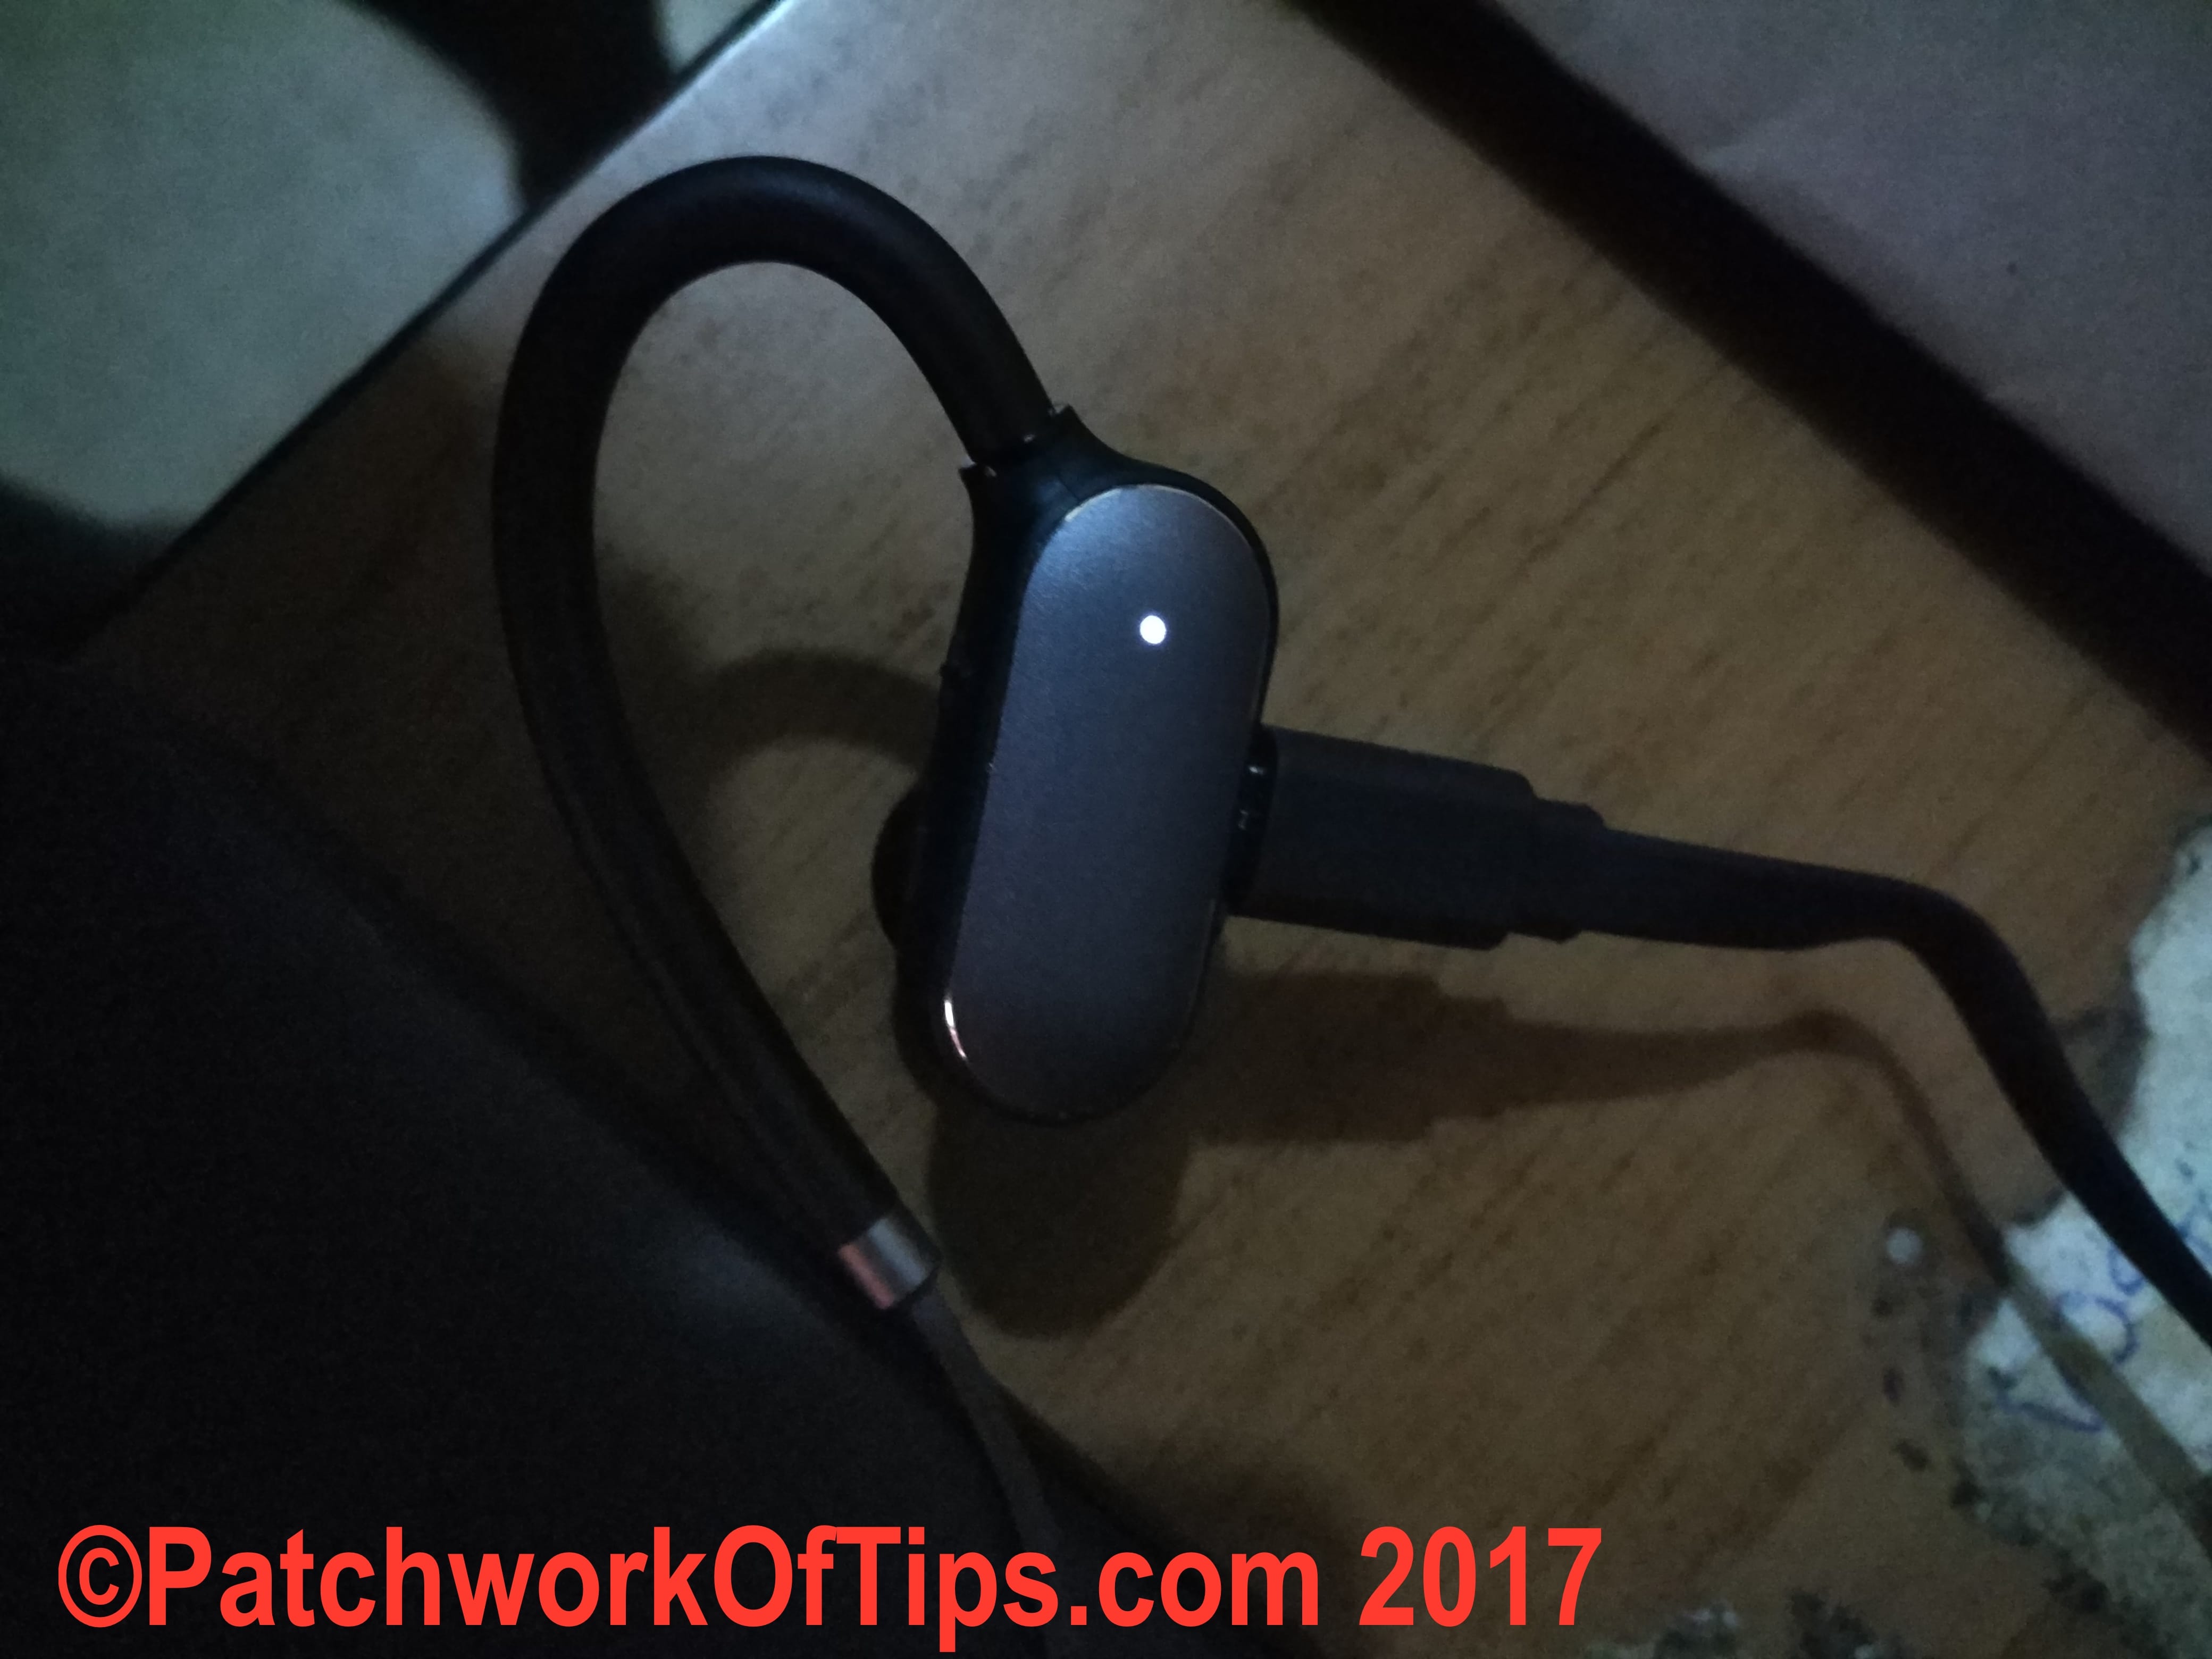 How and Use Xiaomi's Mi Sports Bluetooth Earphones